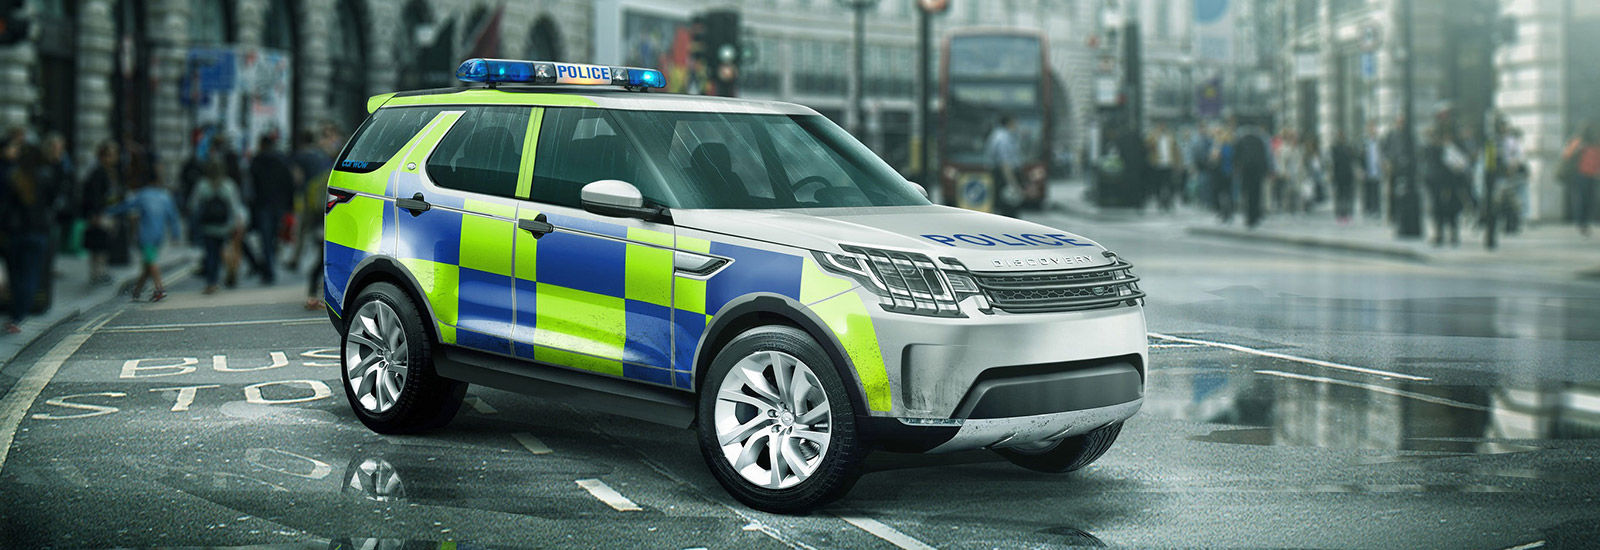 carwow-2017-land-rover-discovery-police-body-image